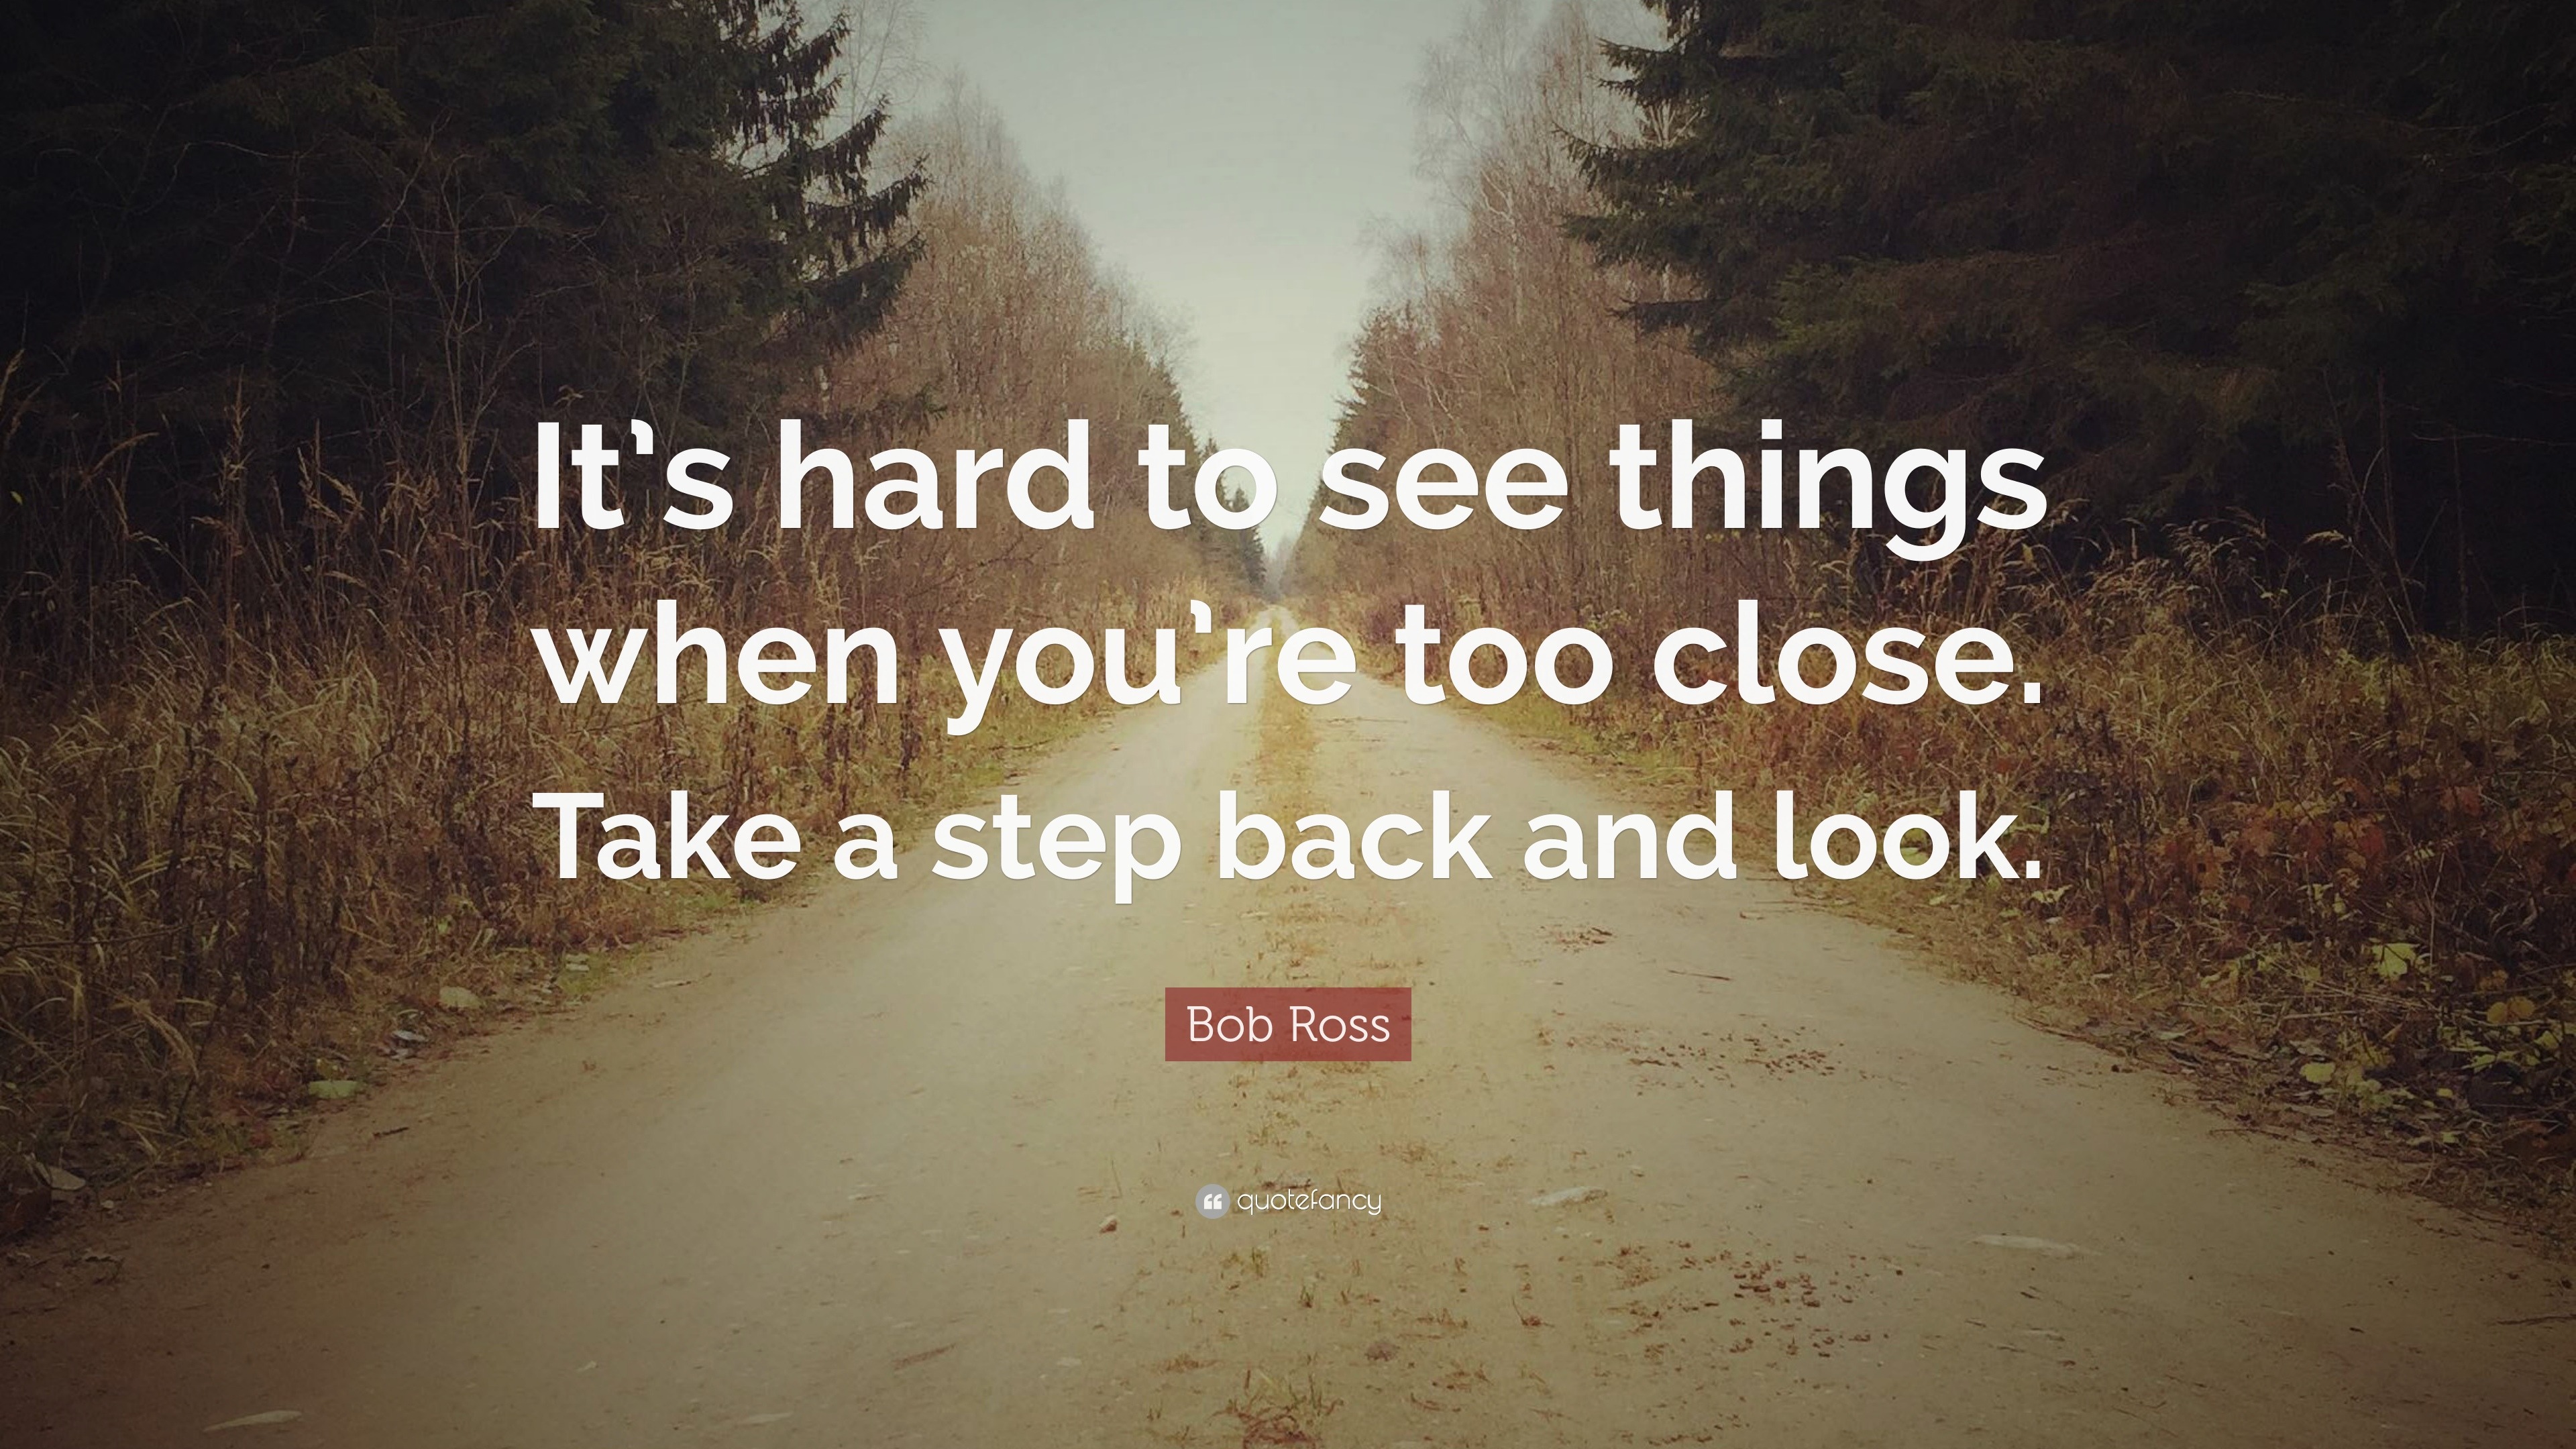 Bob Ross Quote: “It's hard to see things when you're too close. Take a step